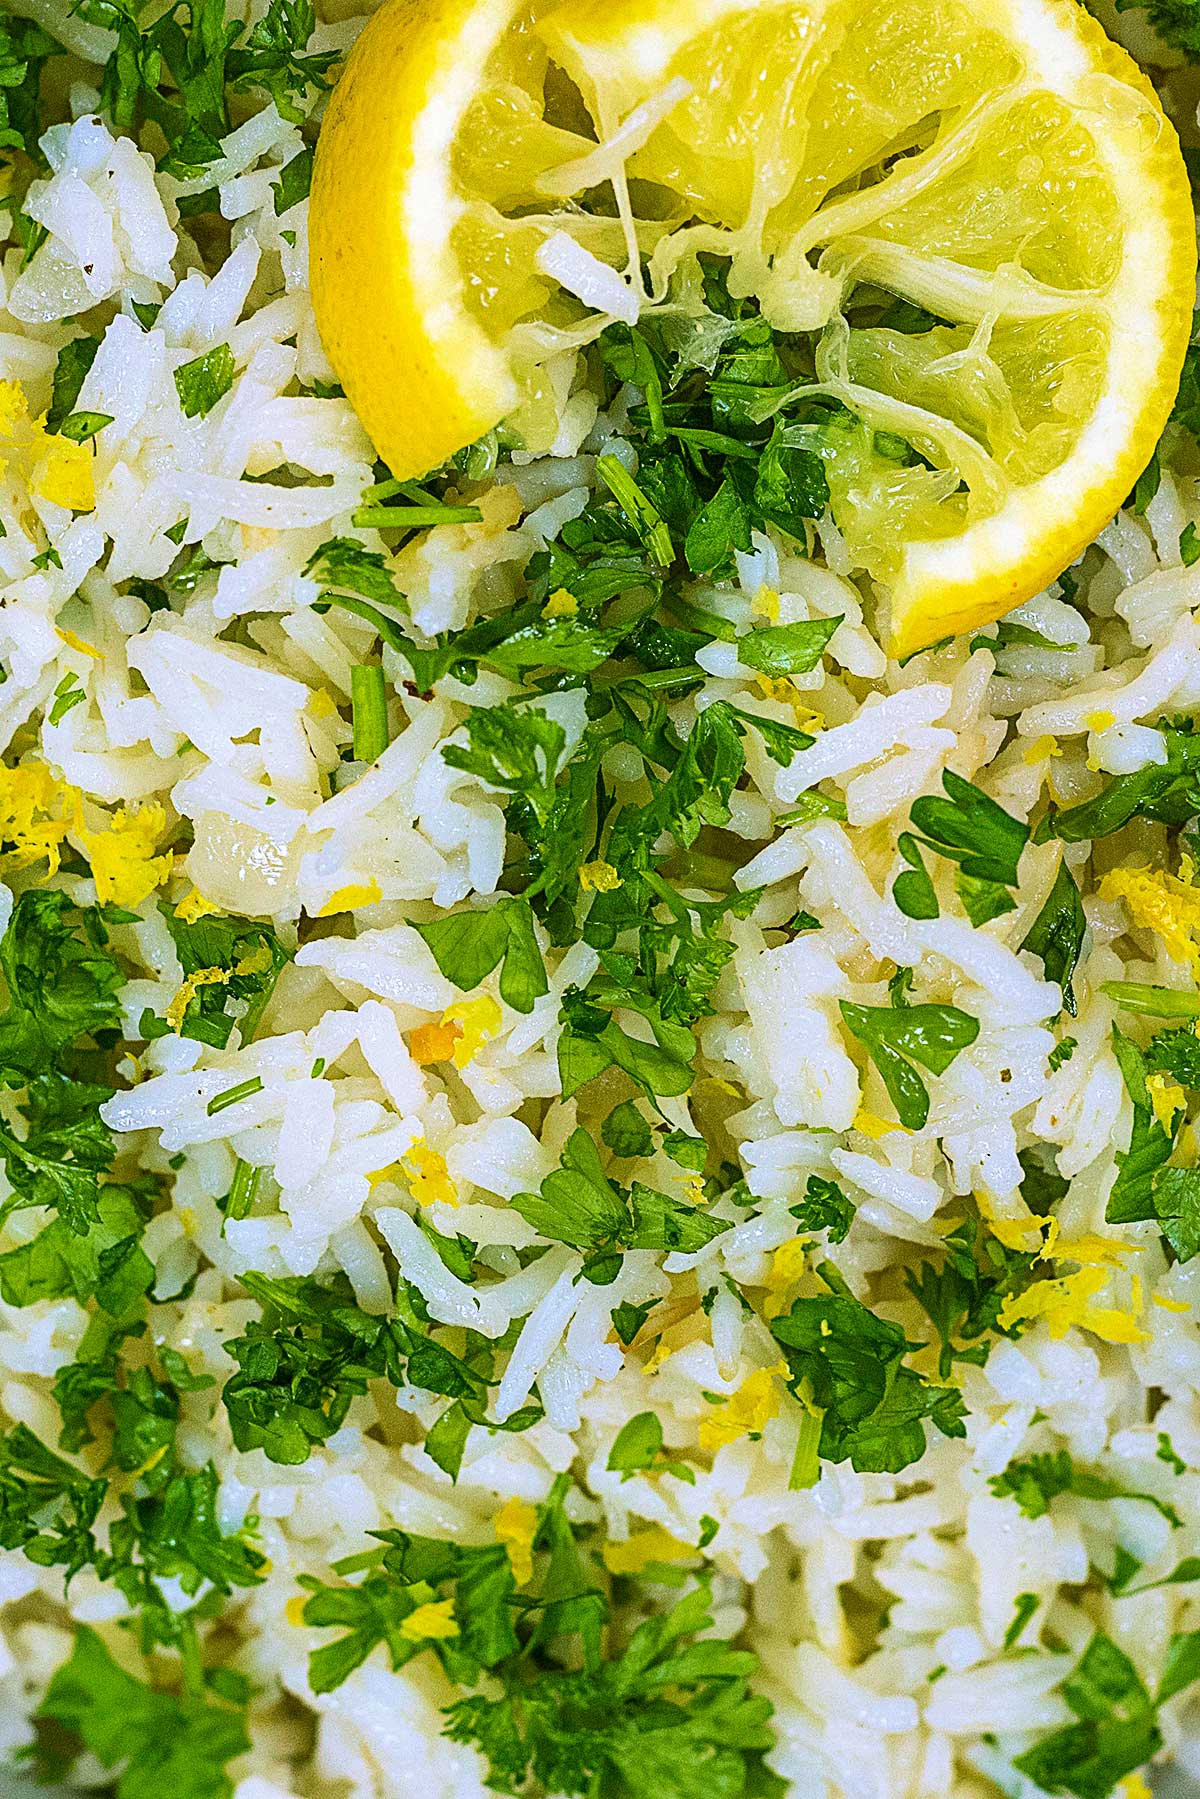 Cooked rice mixed with chopped parsley and lemon zest. A lemon slice is on top.